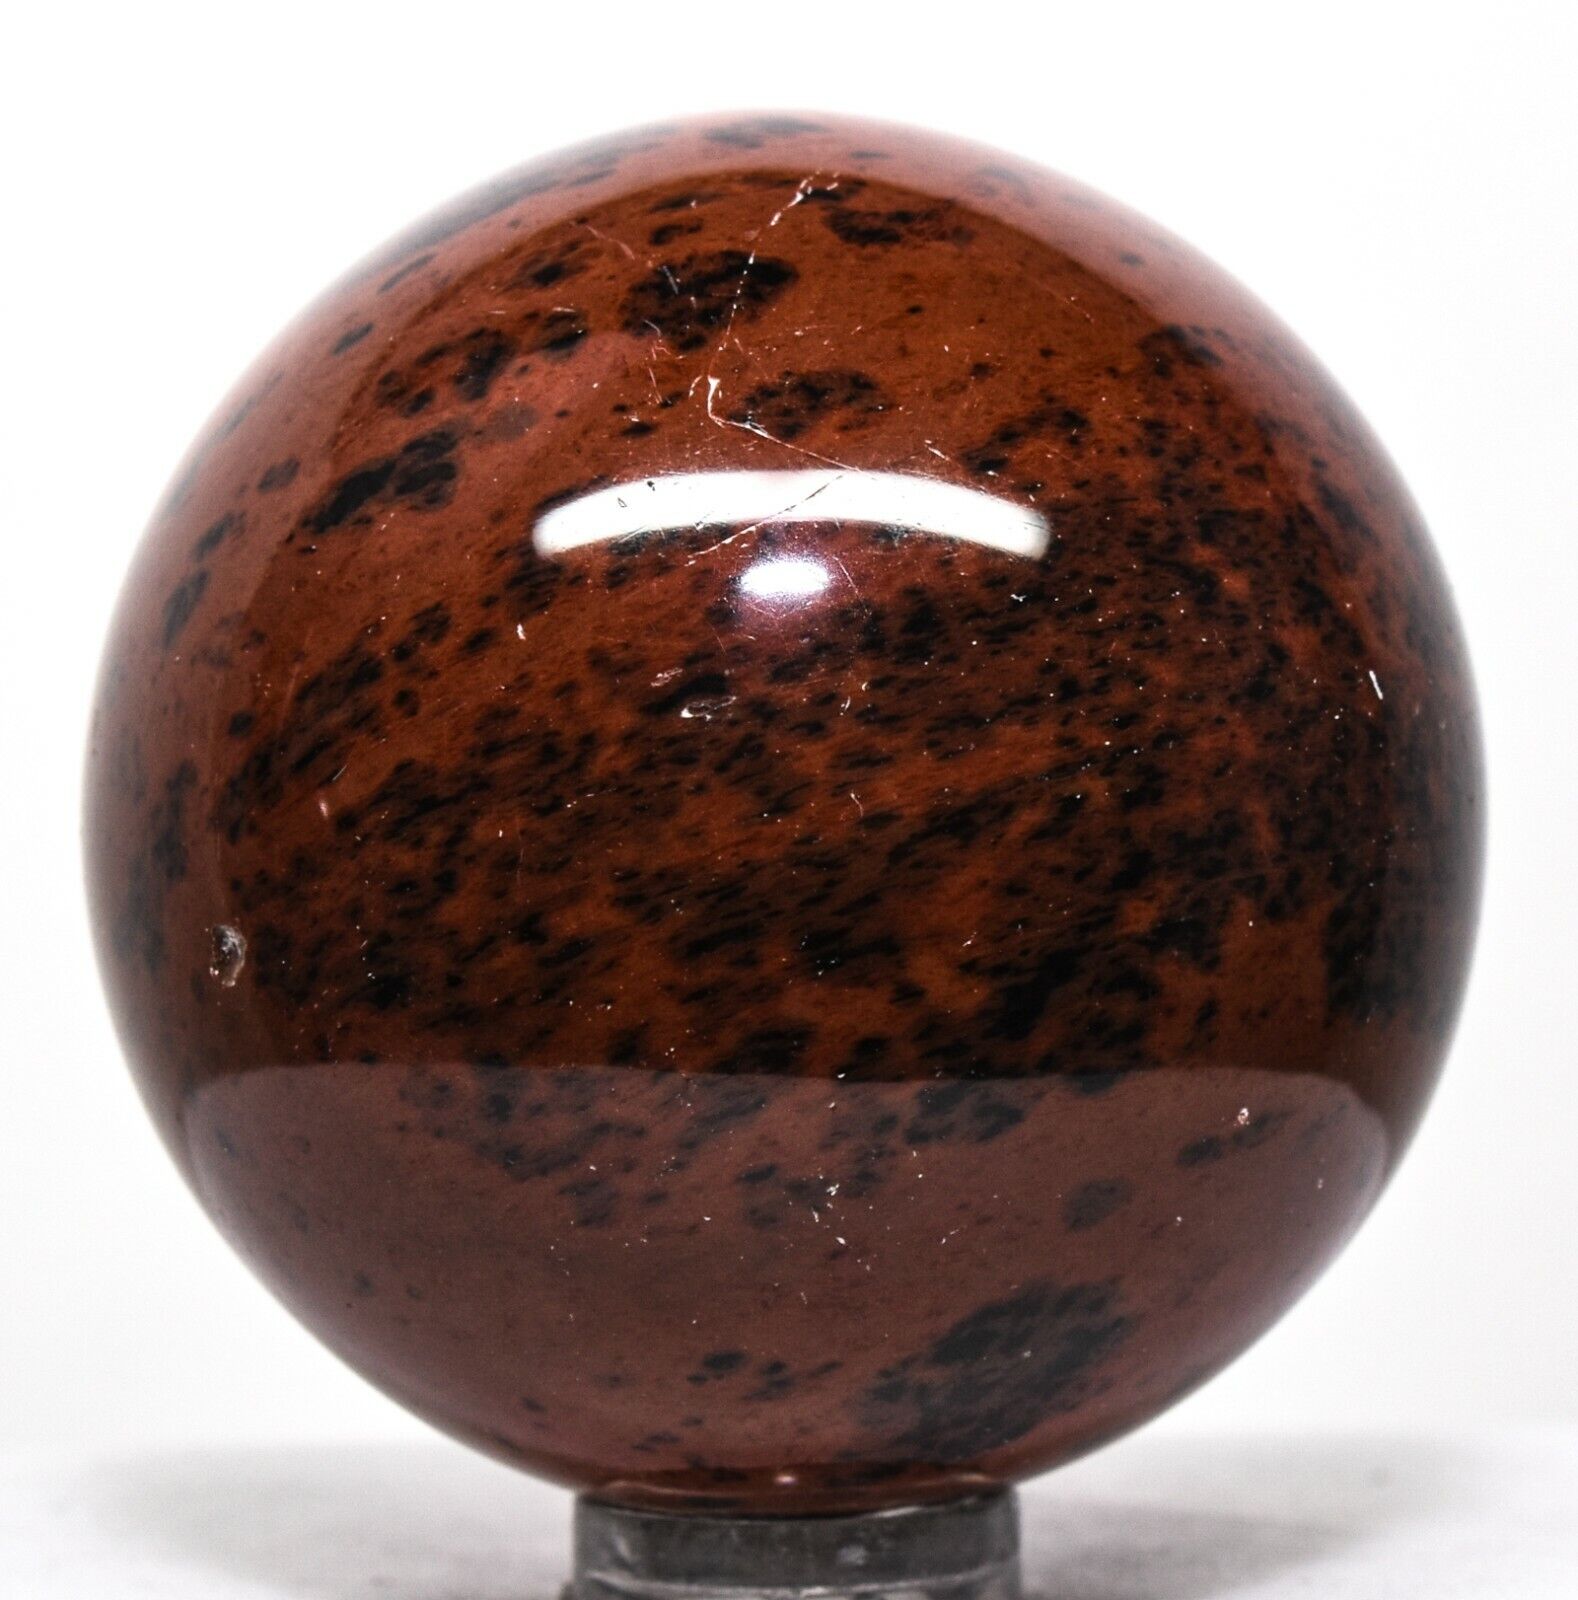 49mm Mahogany Obsidian Sphere Polished Natural Gemstone Crystal Mineral - Mexico